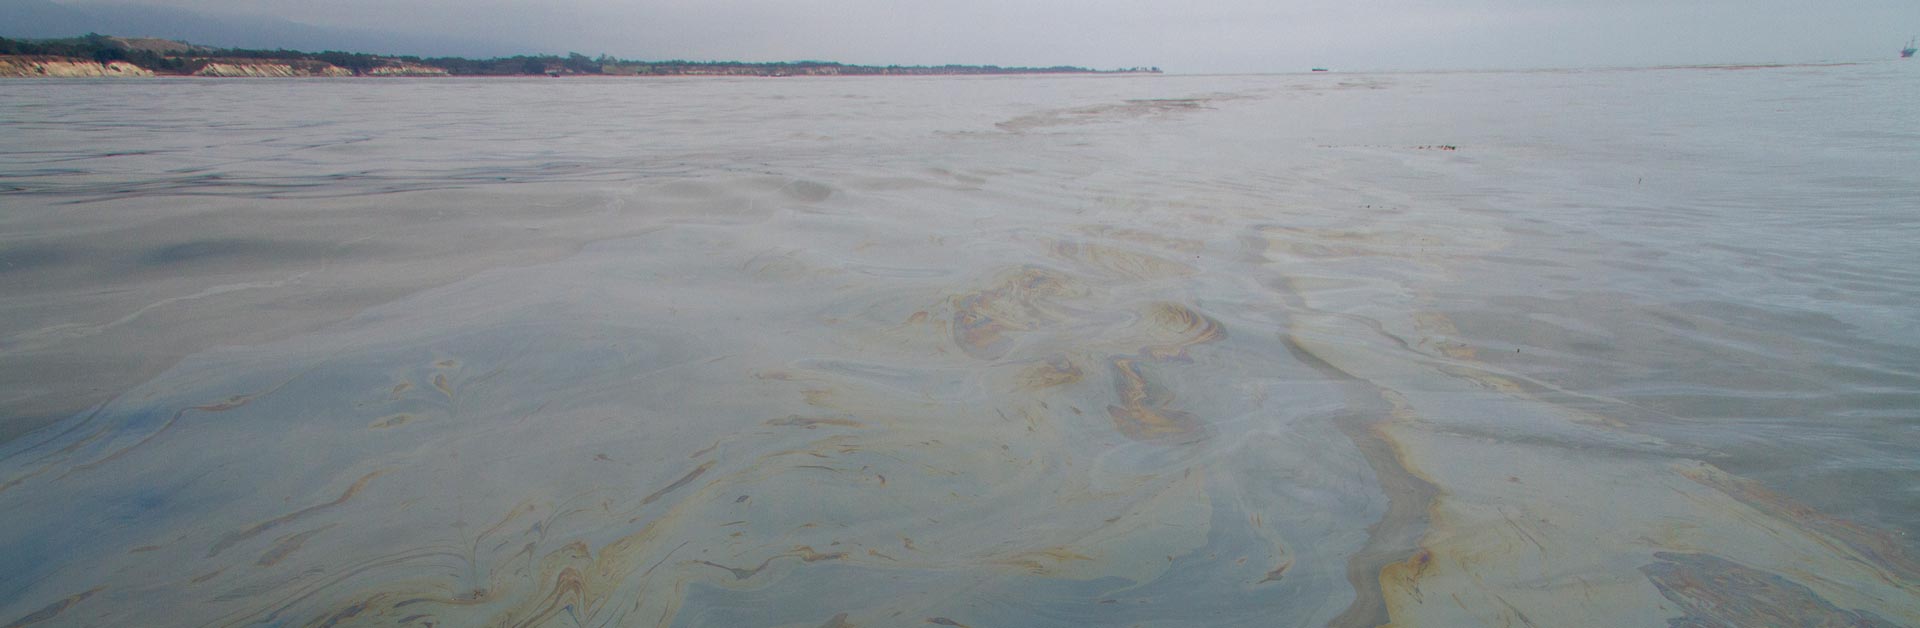 Refugio oil spill shown on the ocean water's surface